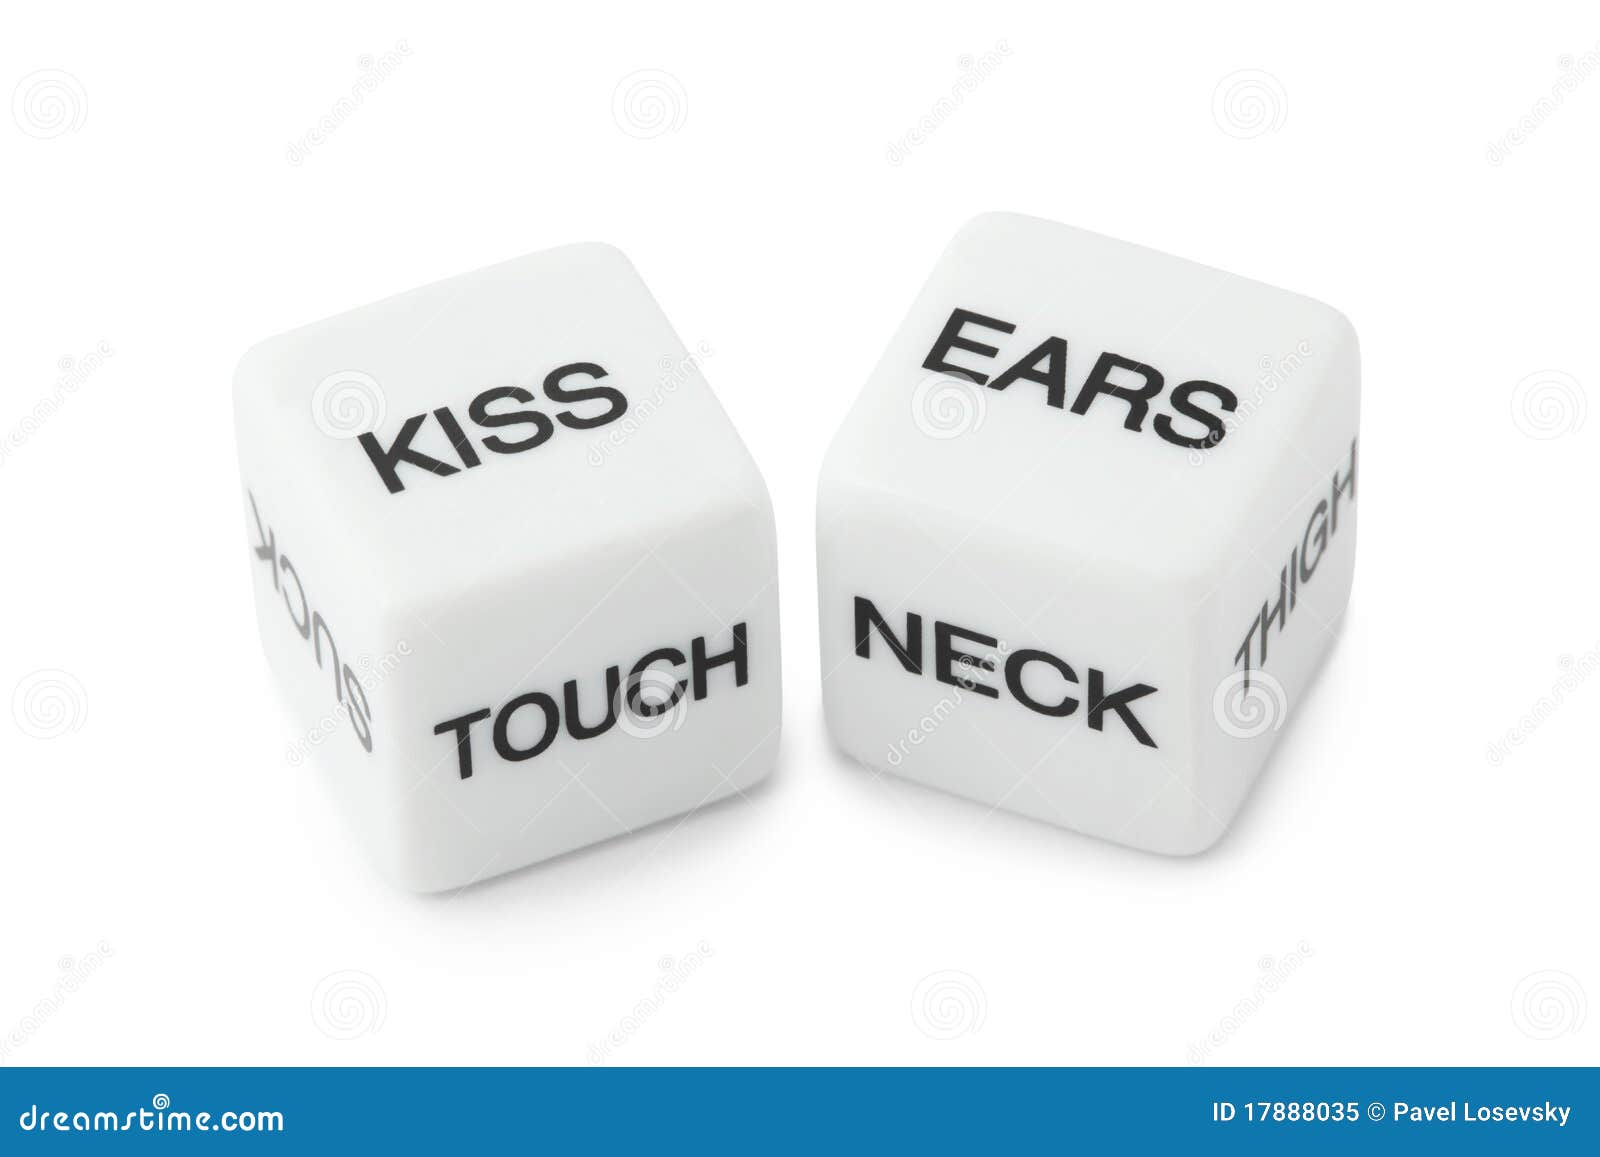 white dice with erotic messages on sides